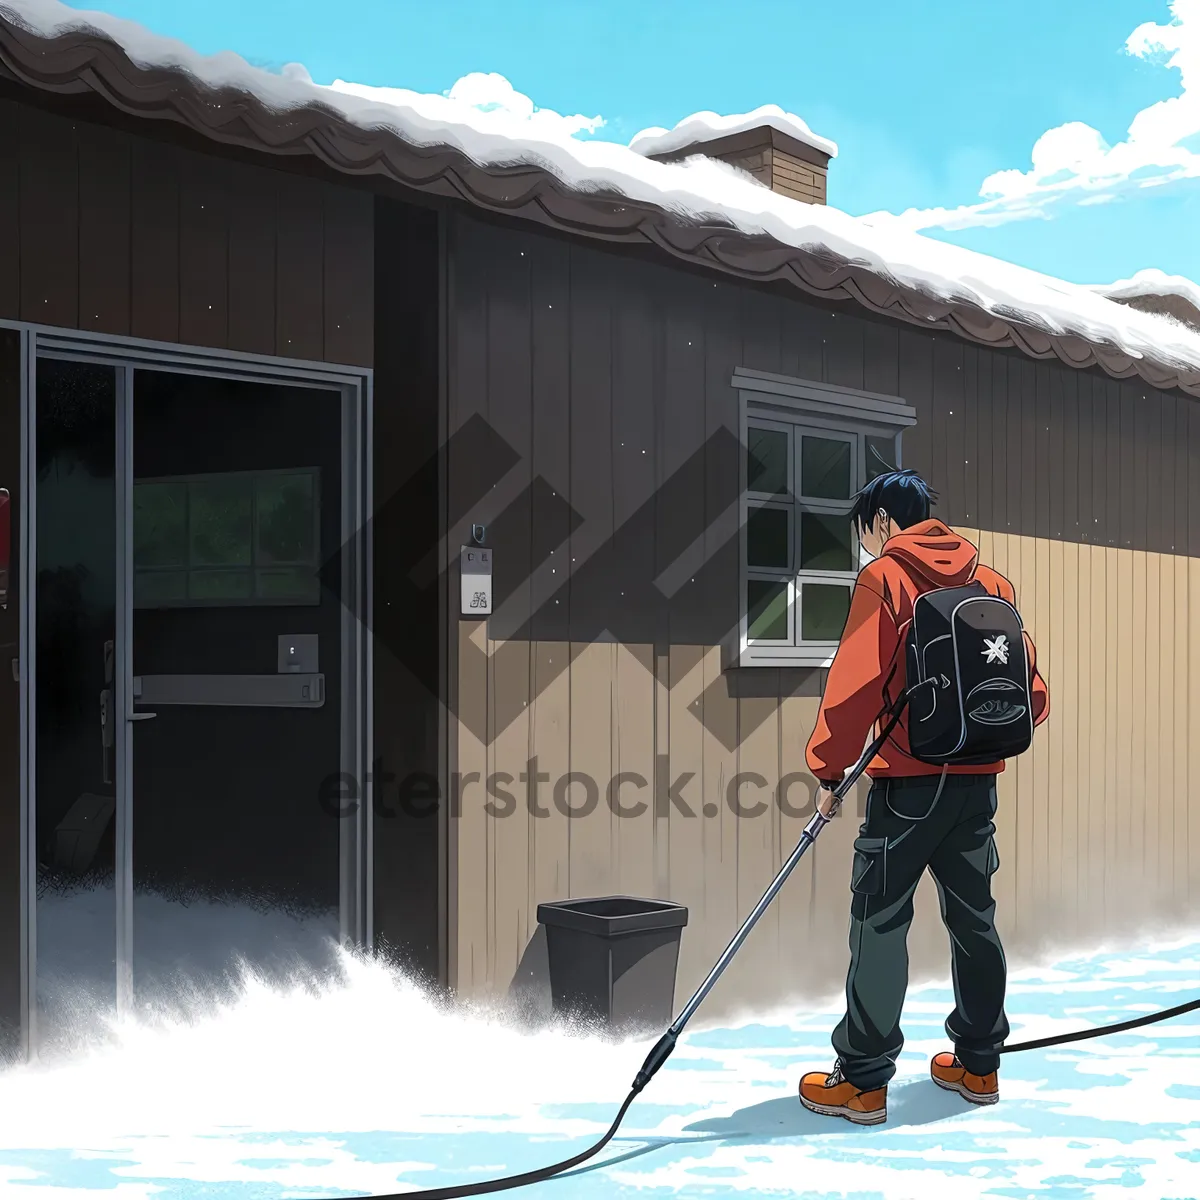 Picture of Man skiing down snowy slope at ski resort